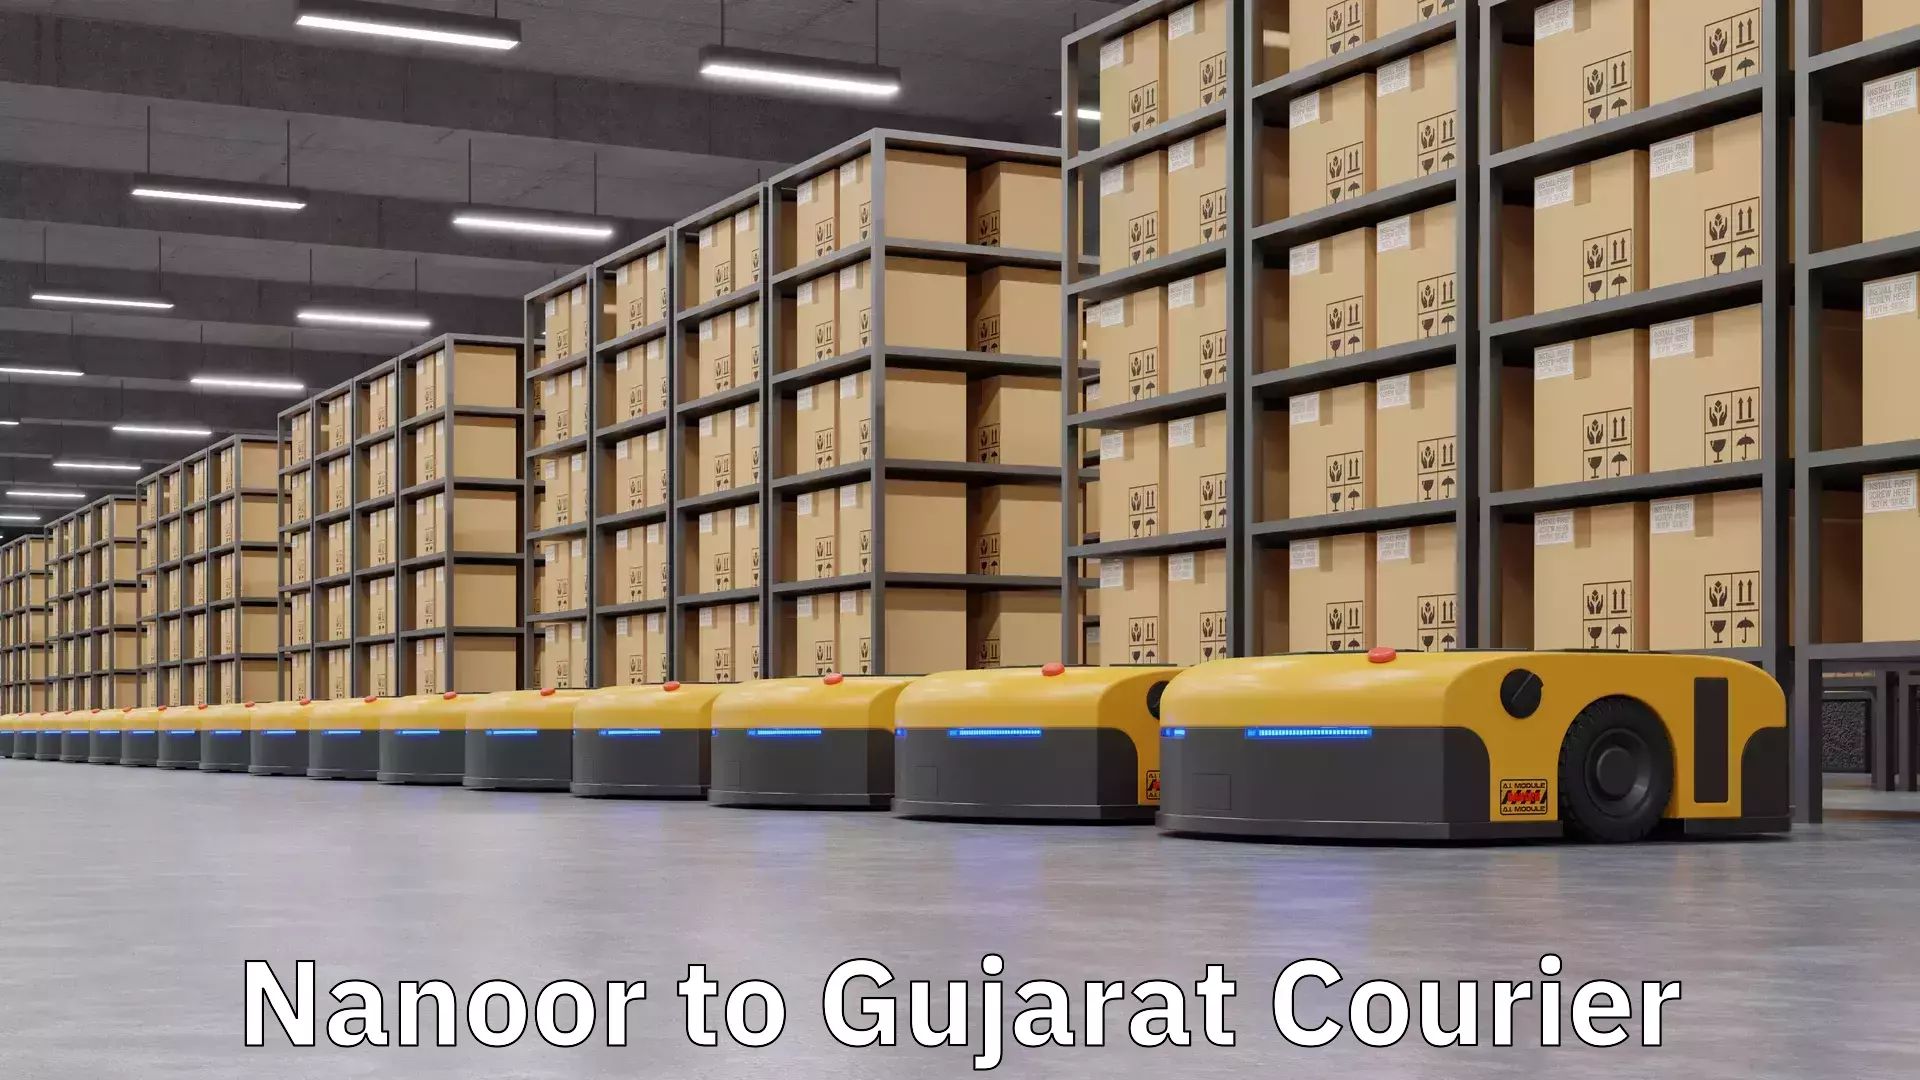 Fast shipping solutions Nanoor to Gujarat